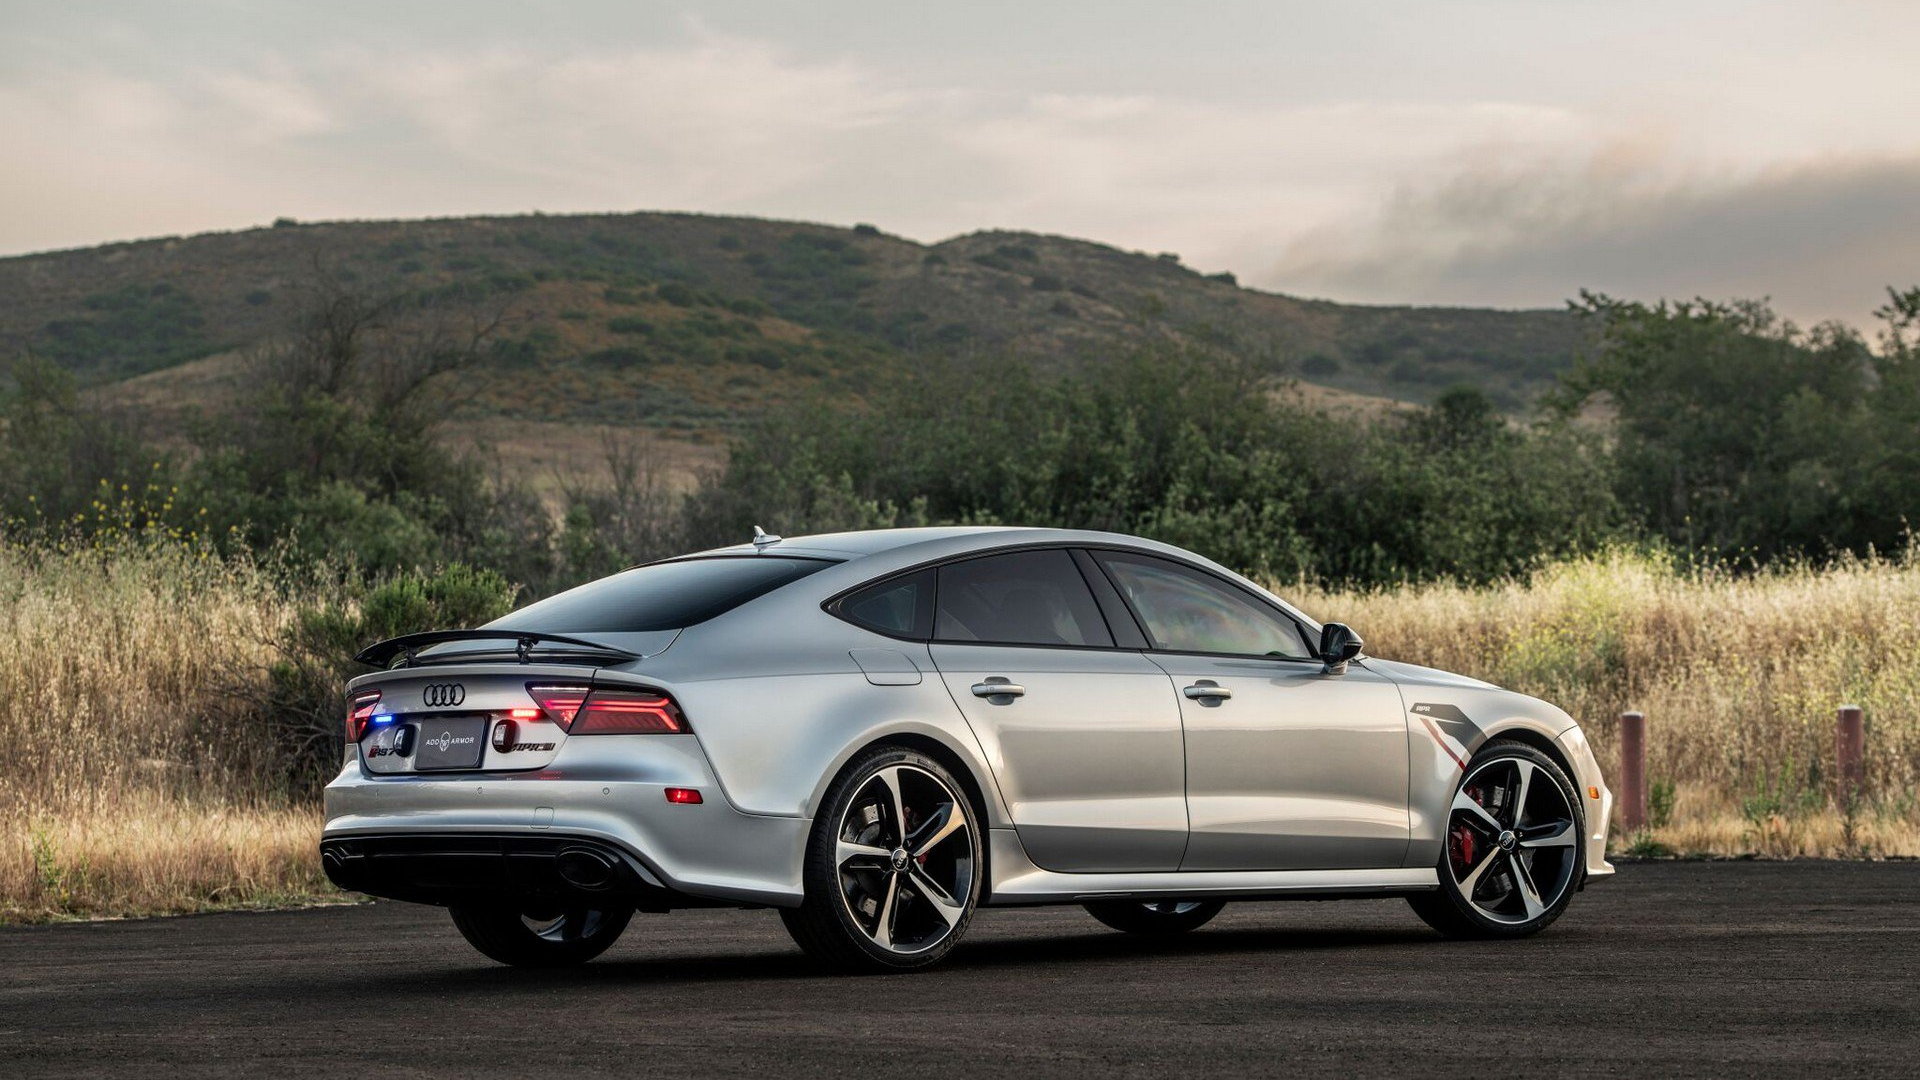 Armored Audi RS 7 by AddArmor